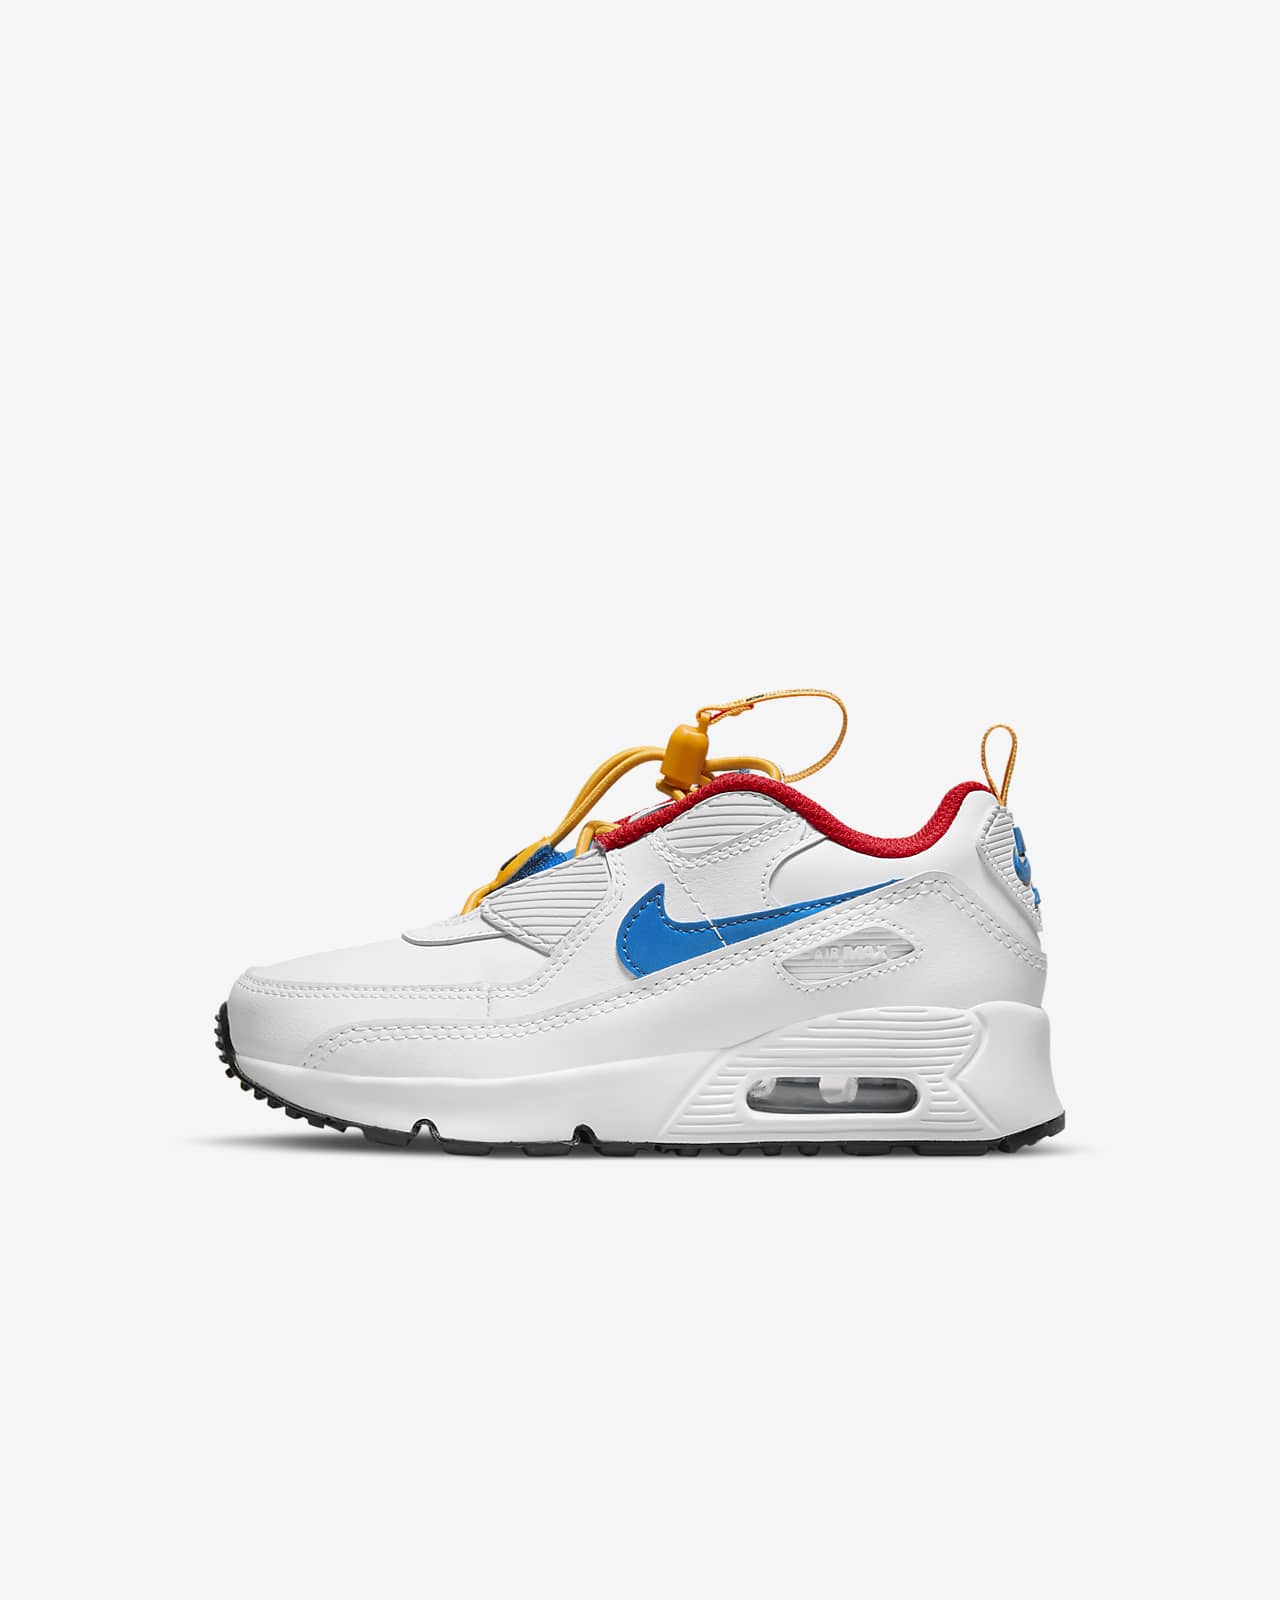 Nike Air Max 90 Toggle Younger Kids' Shoe